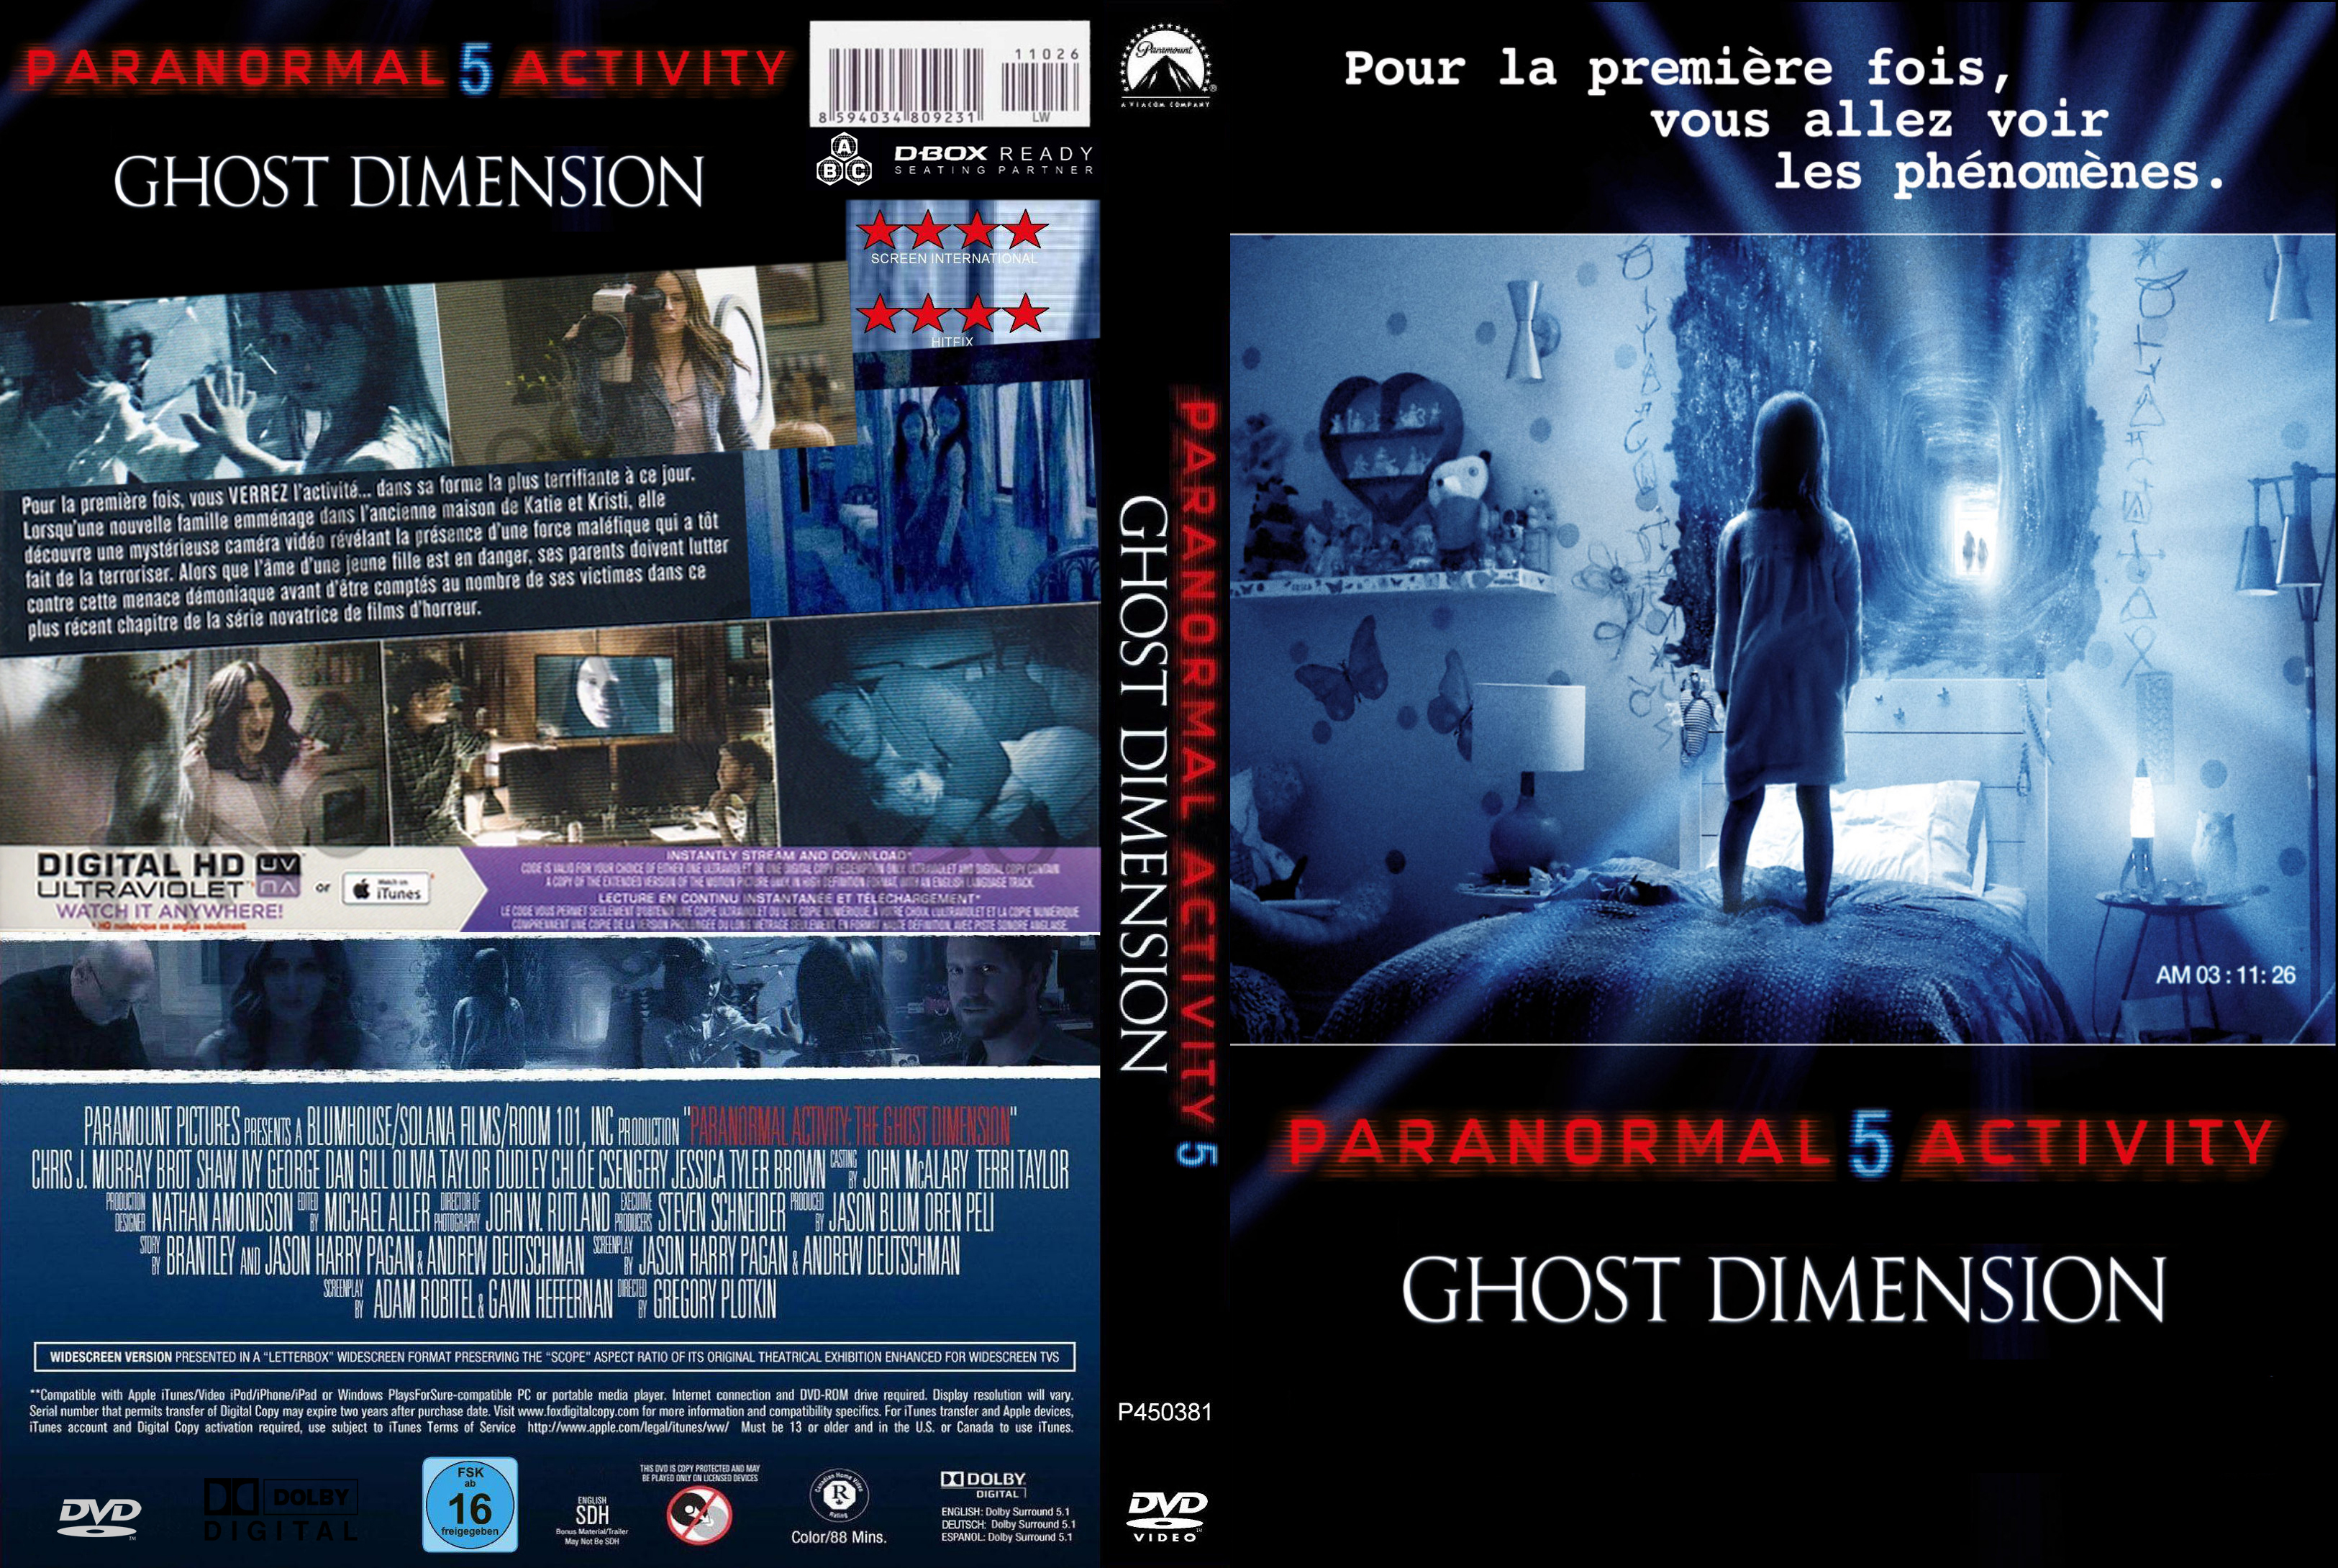 Jaquette DVD Paranormal Activity 5 Ghost Dimension custom